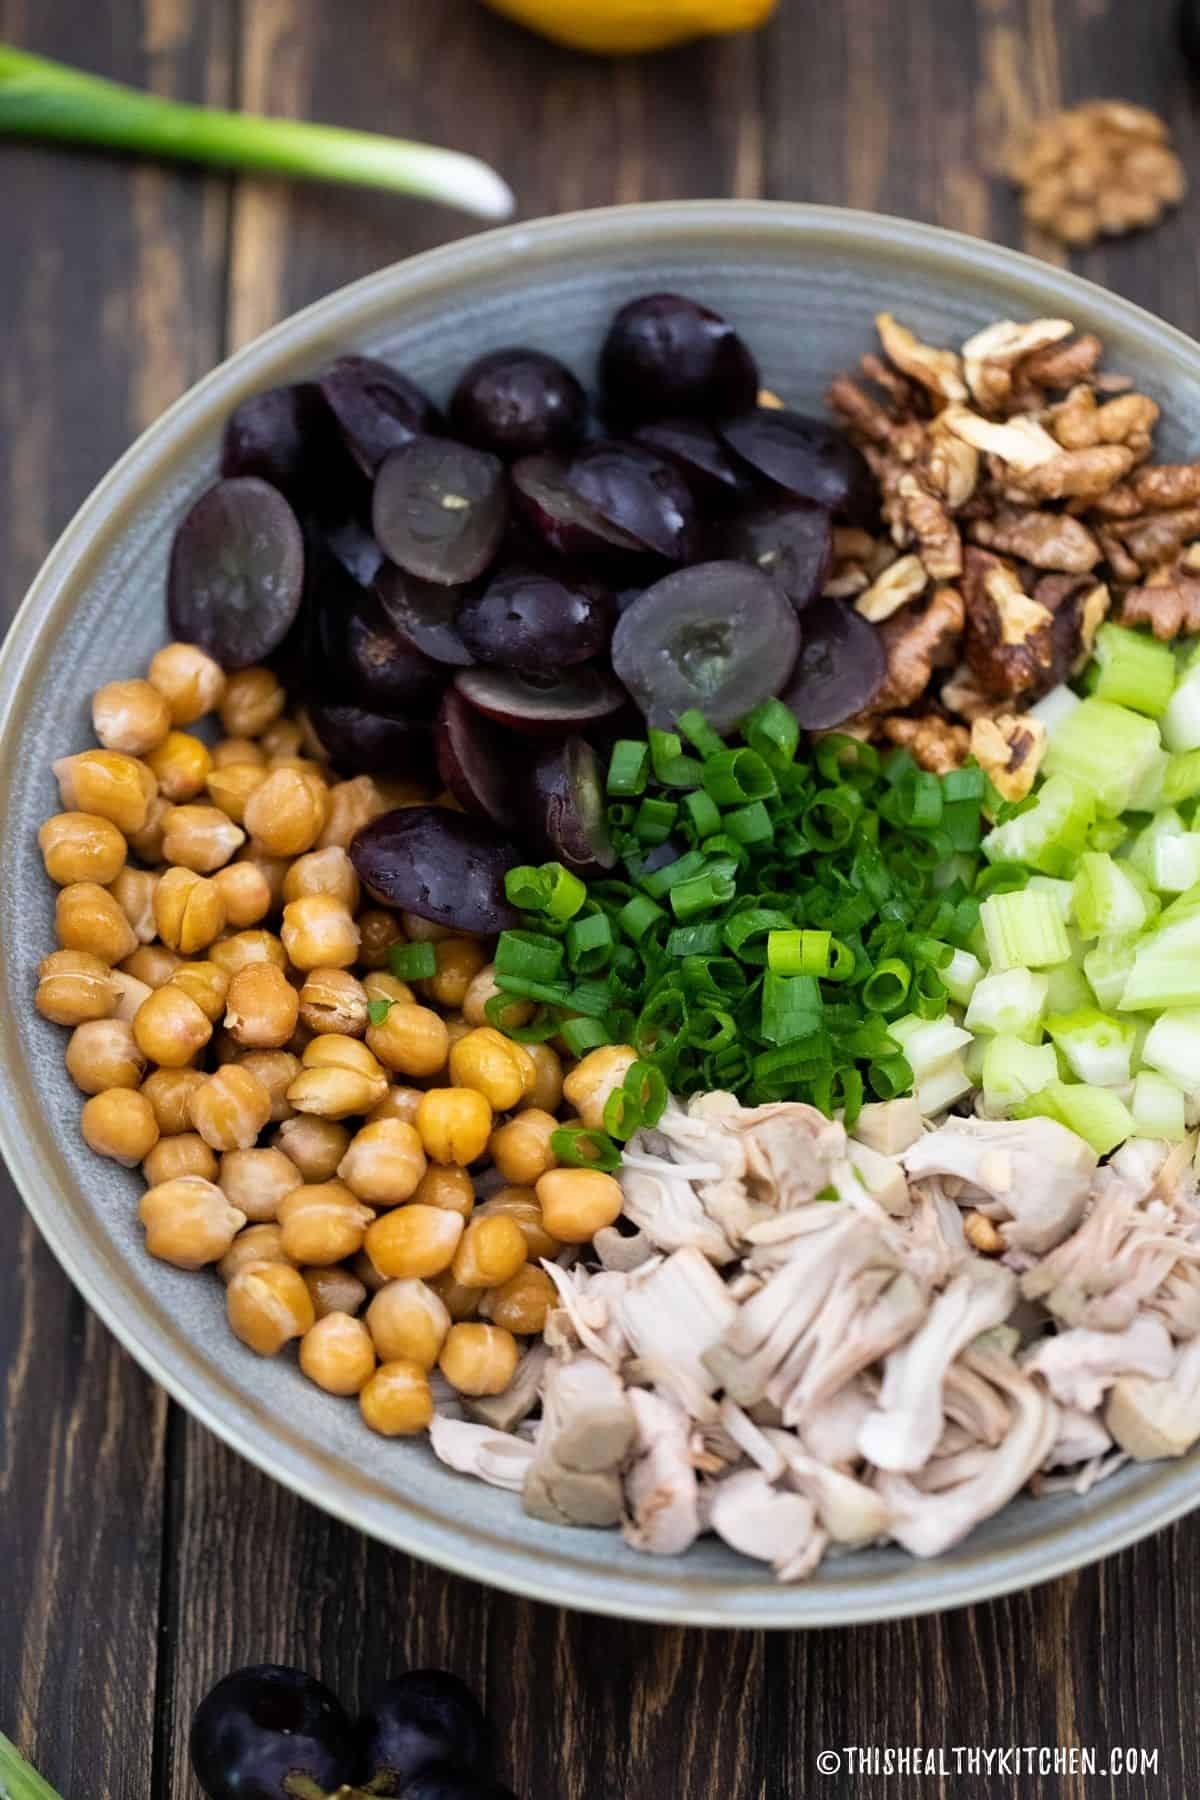 Bowl with shredded jackfruit, chickpeas, grapes, green onion, walnuts, and diced celery.